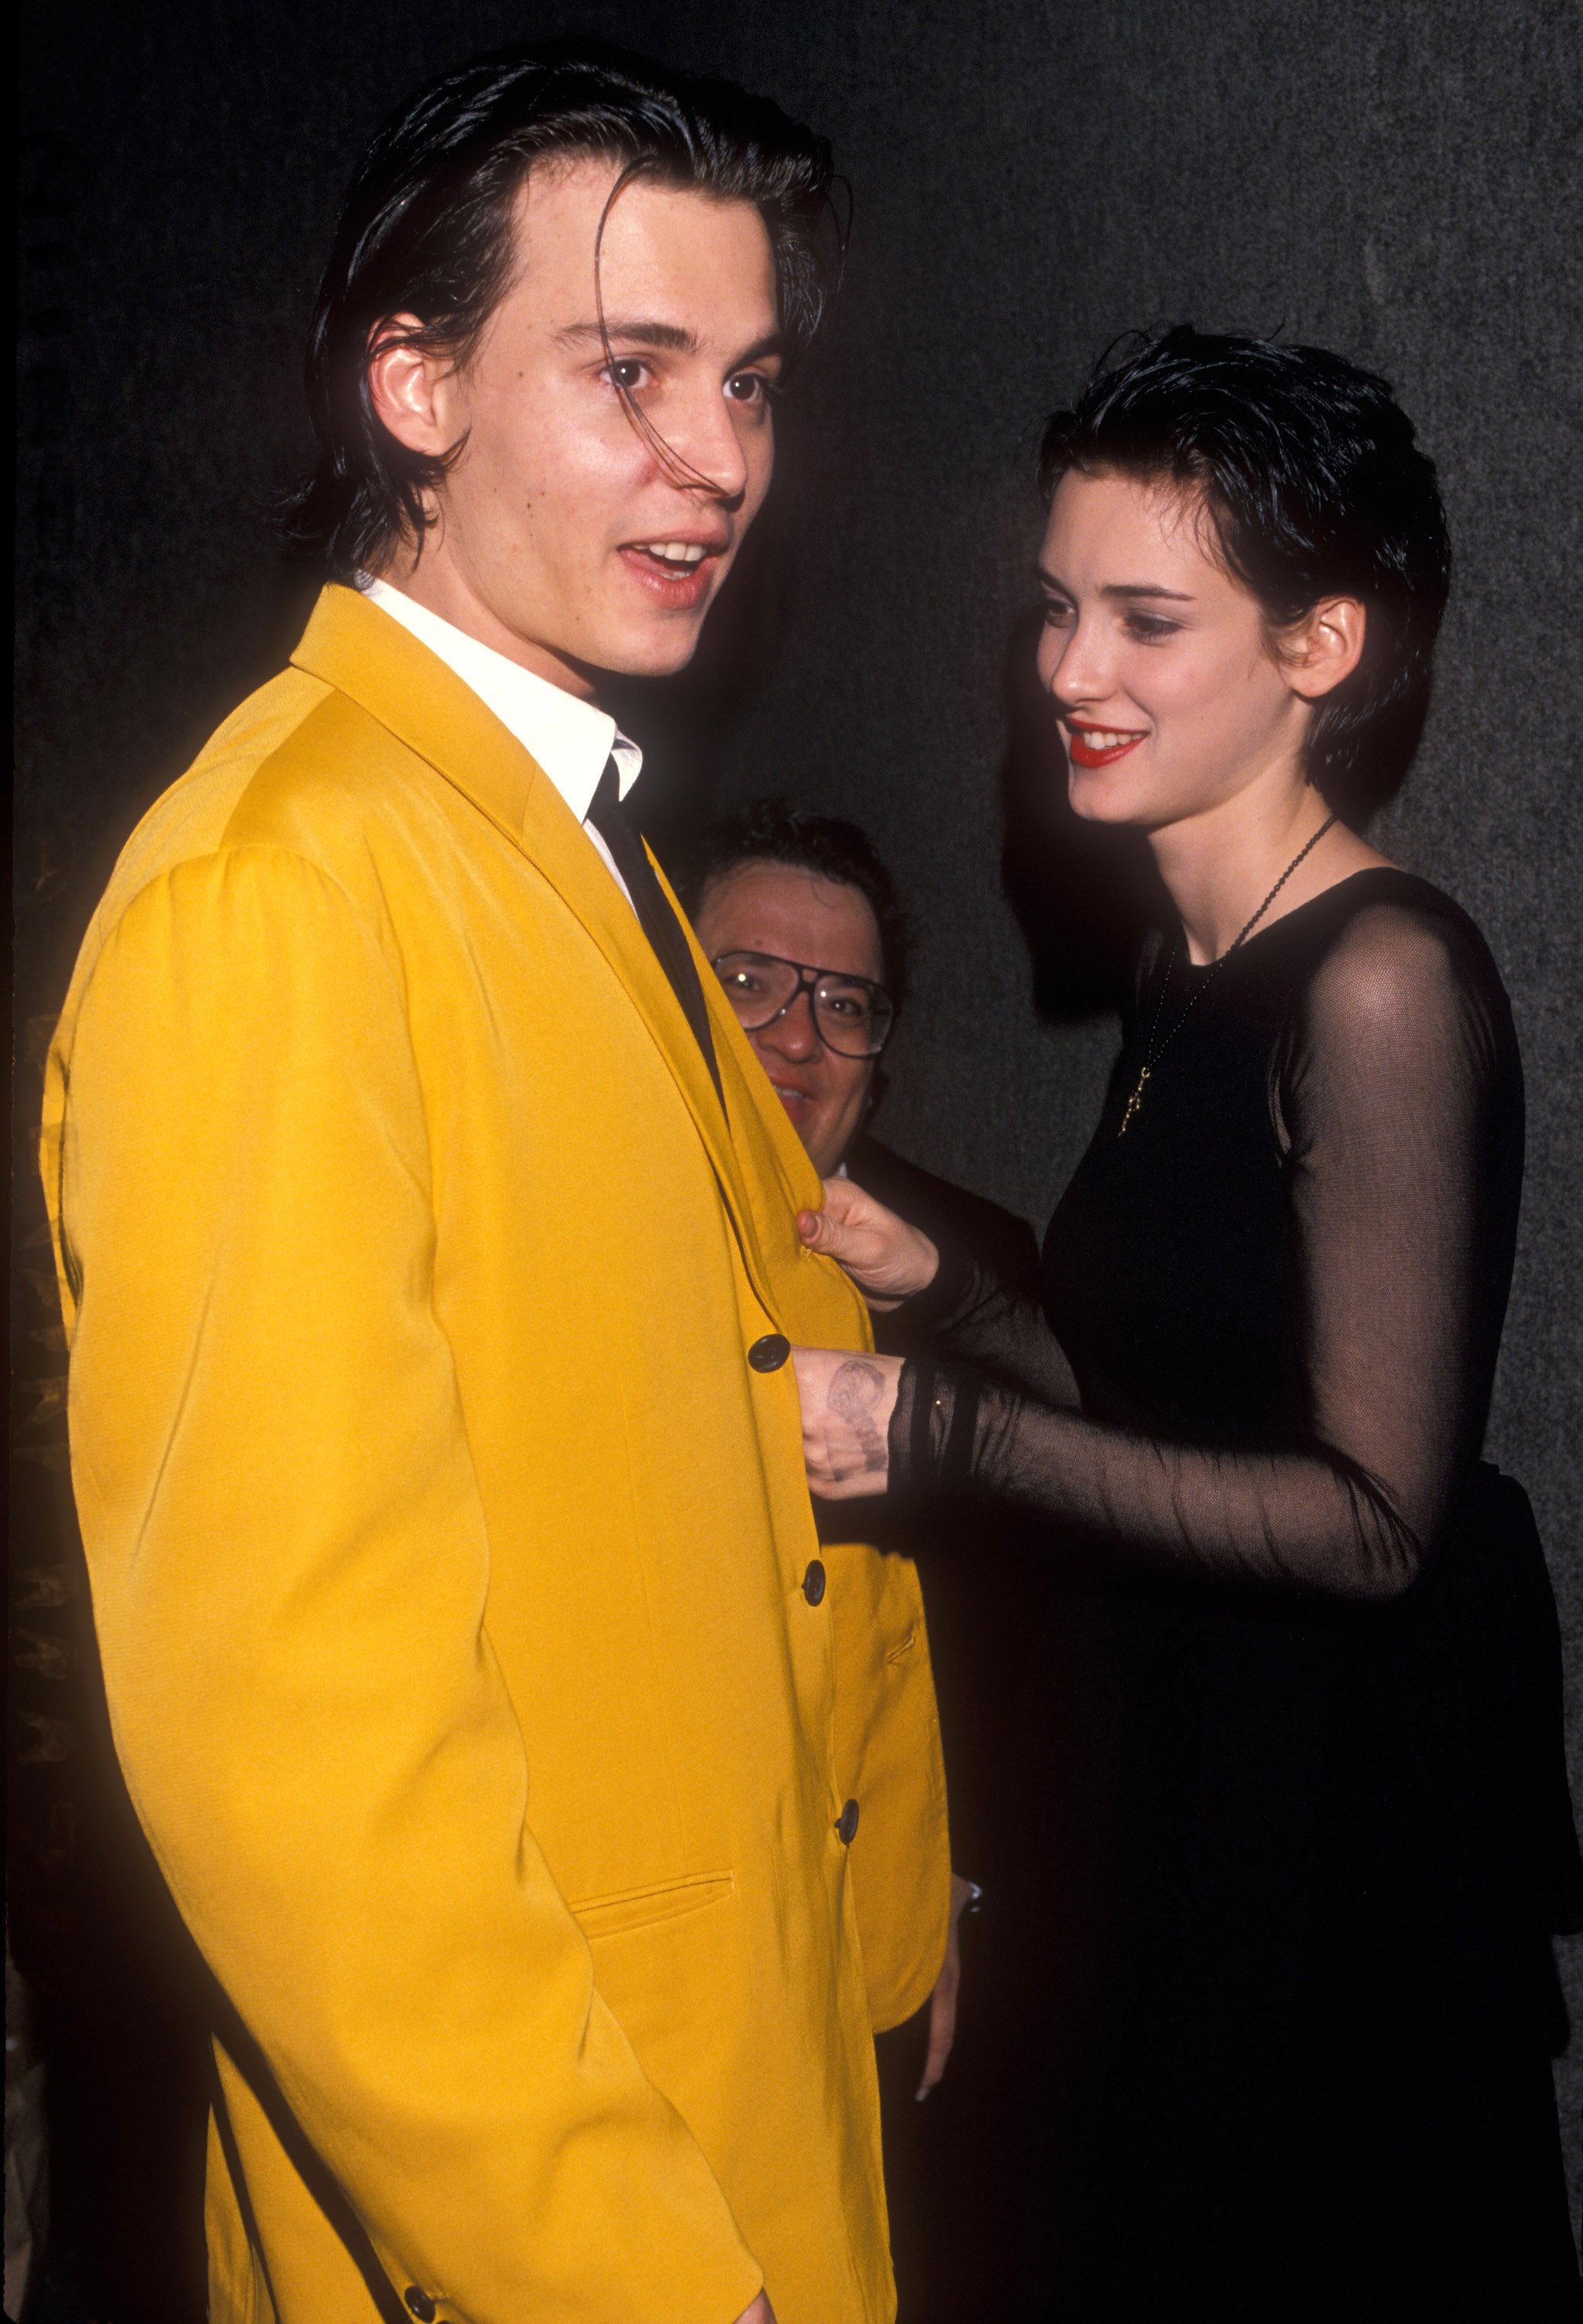 Johnny Depp and Winona Ryder at the "Cry-Baby" premiere in Baltimore, Maryland, on July 1, 1990. | Source: Ke.Mazur/WireImage/Getty Images